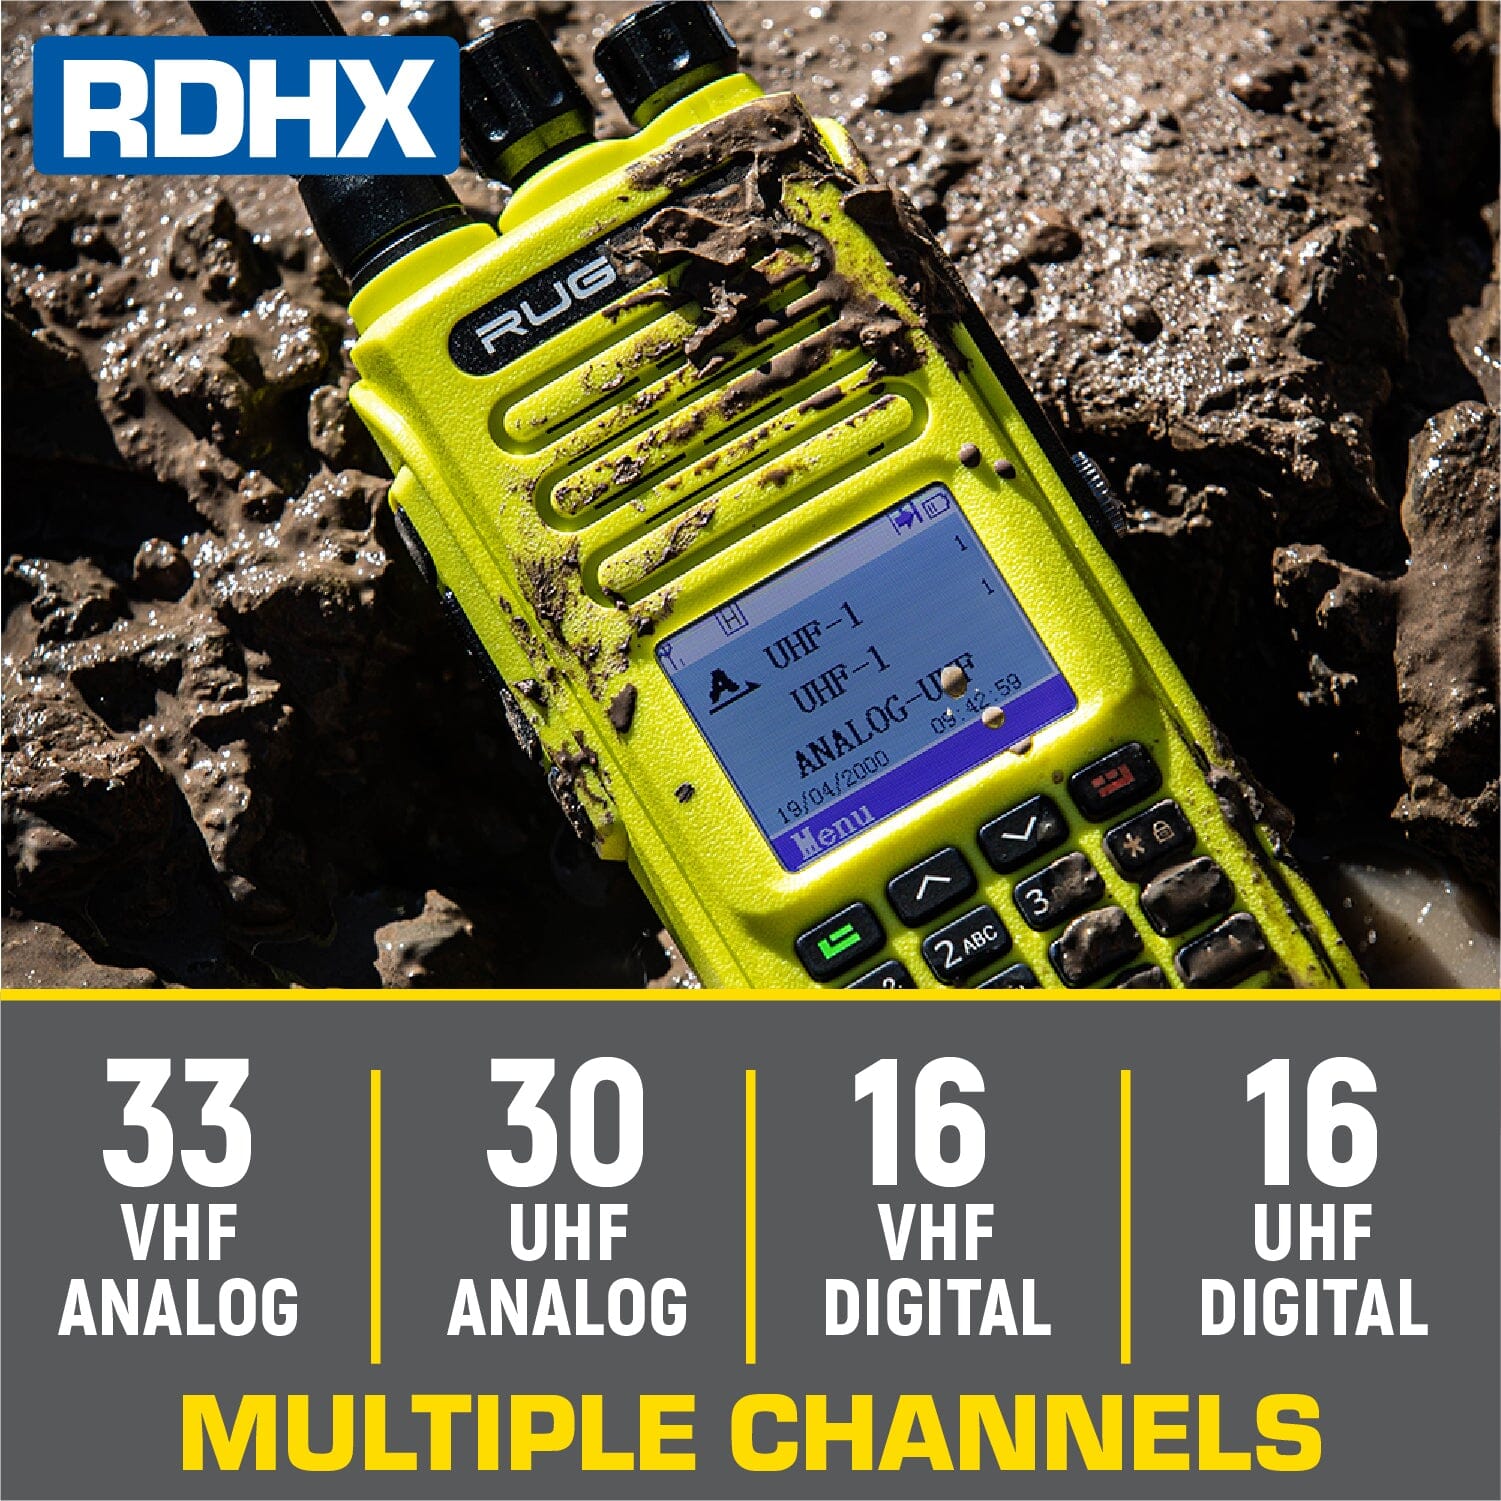 RDHX waterproof handheld radio with multiple VHF and UHF channels in analog and digital